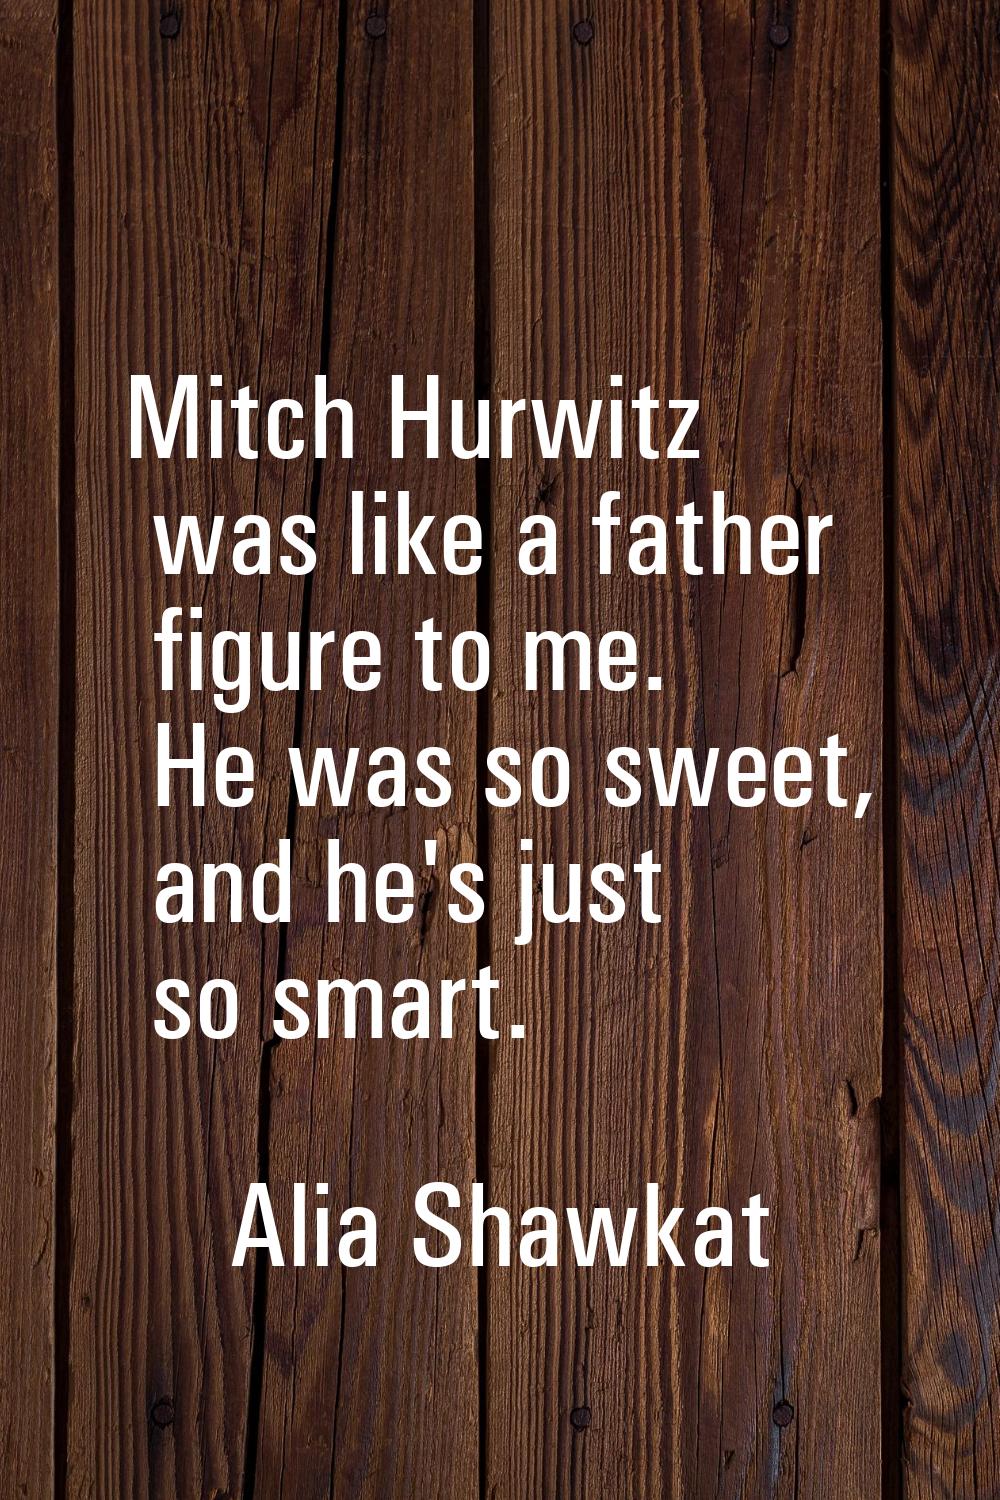 Mitch Hurwitz was like a father figure to me. He was so sweet, and he's just so smart.